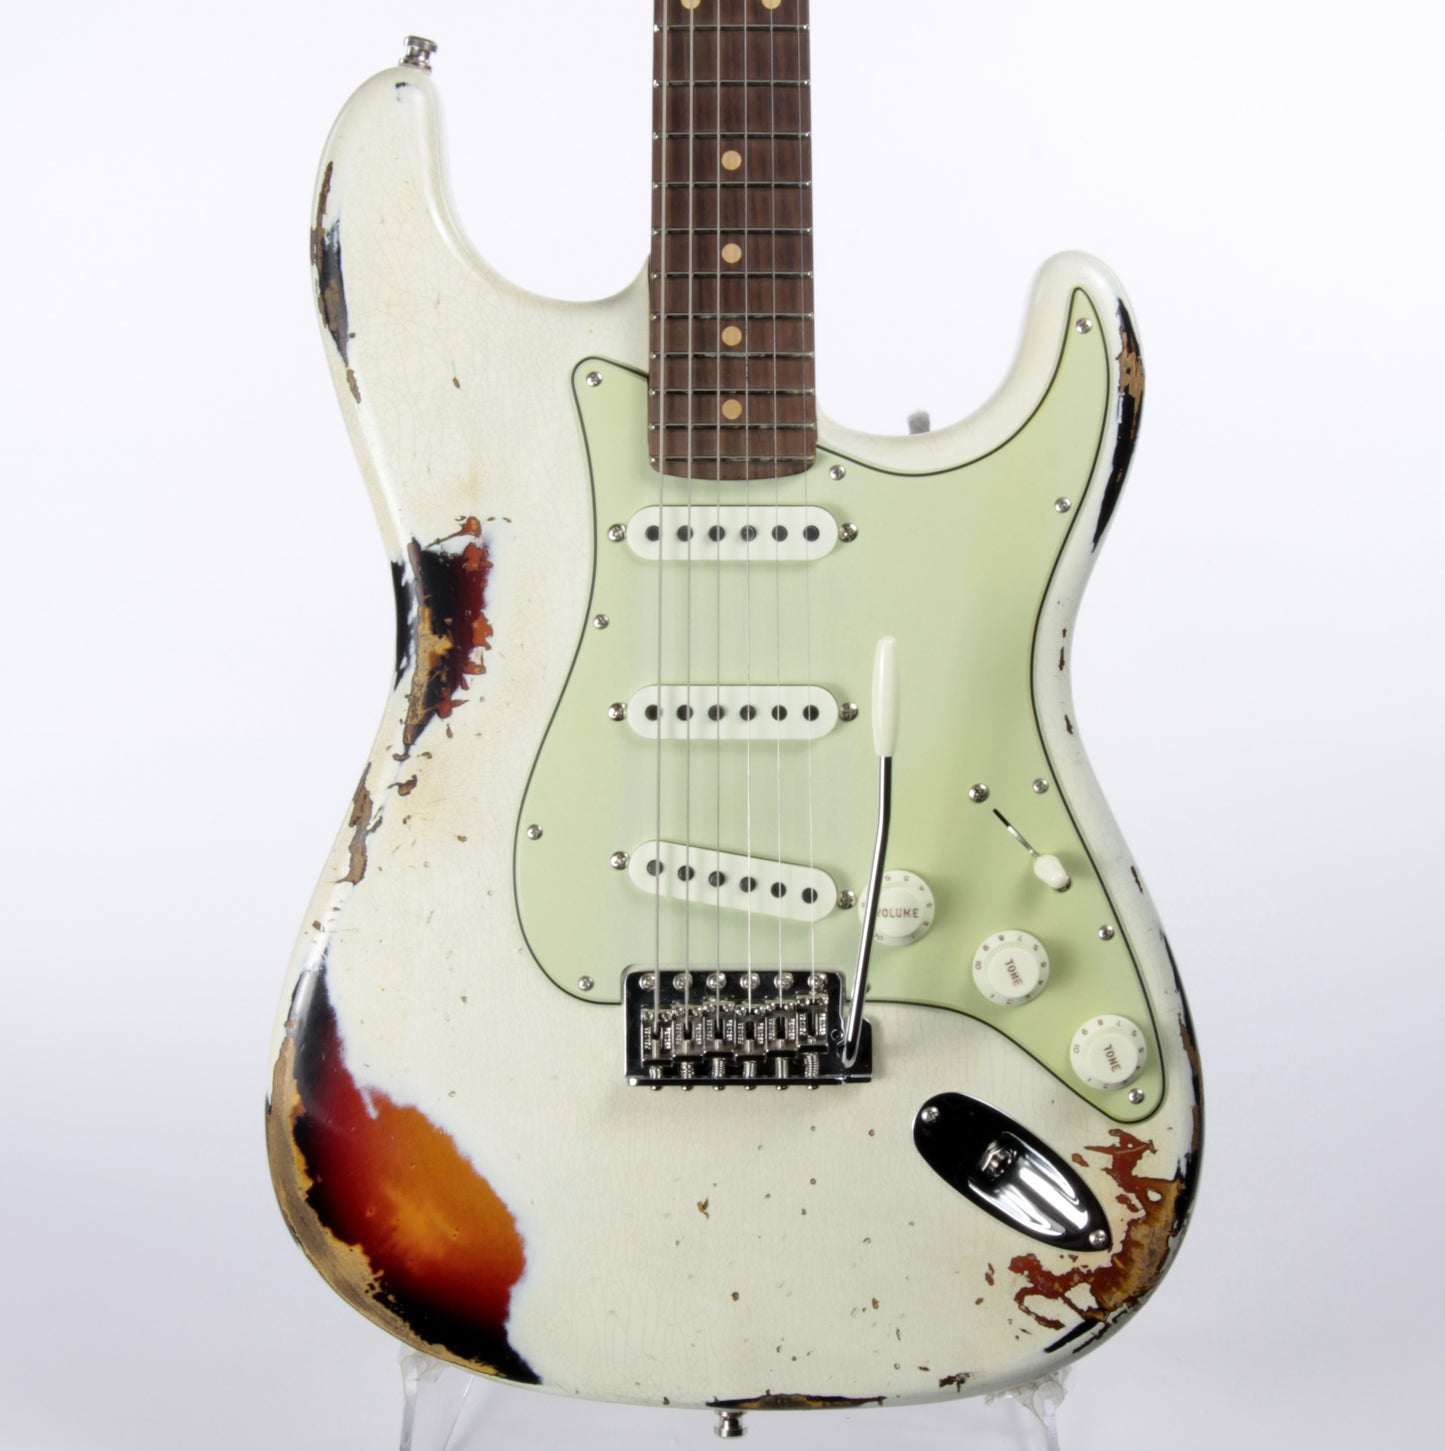 2020 Fender '64 Custom Shop GT11 Heavy Relic Stratocaster Roasted Flame Neck! Olympic White/Sunburst Sweetwater